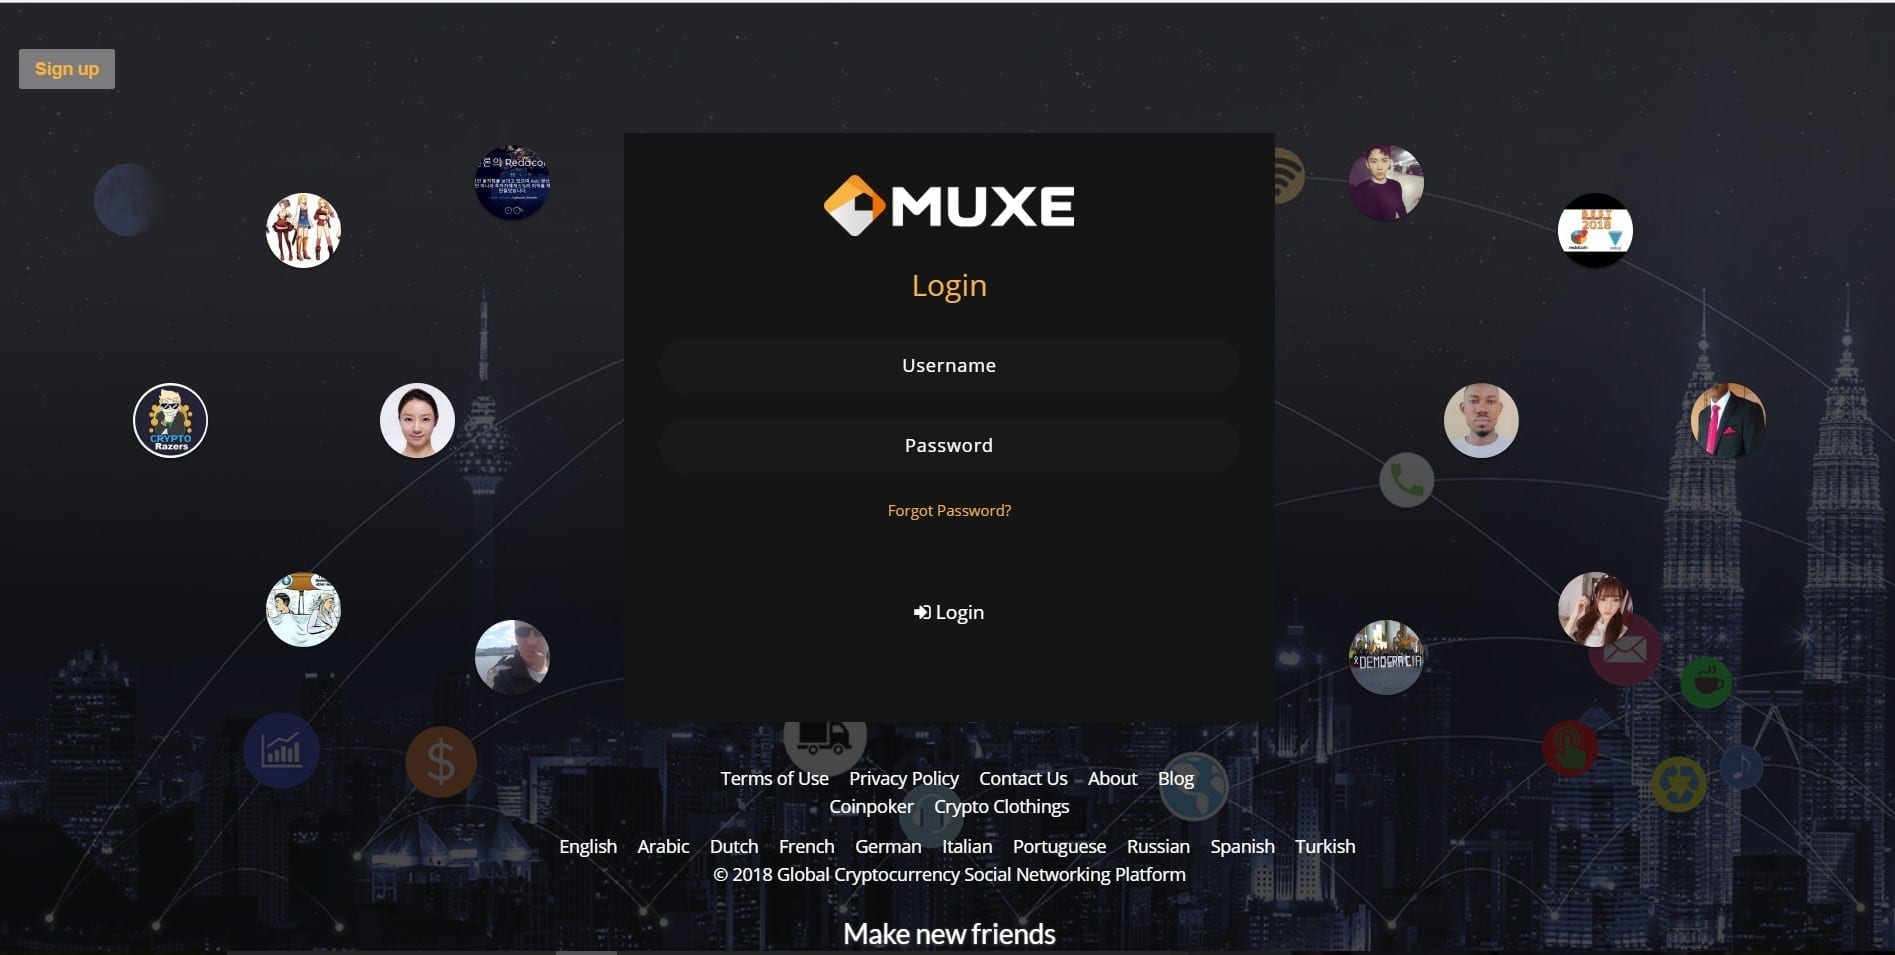 MUXE online sign up is the Social network for the MUXE Community